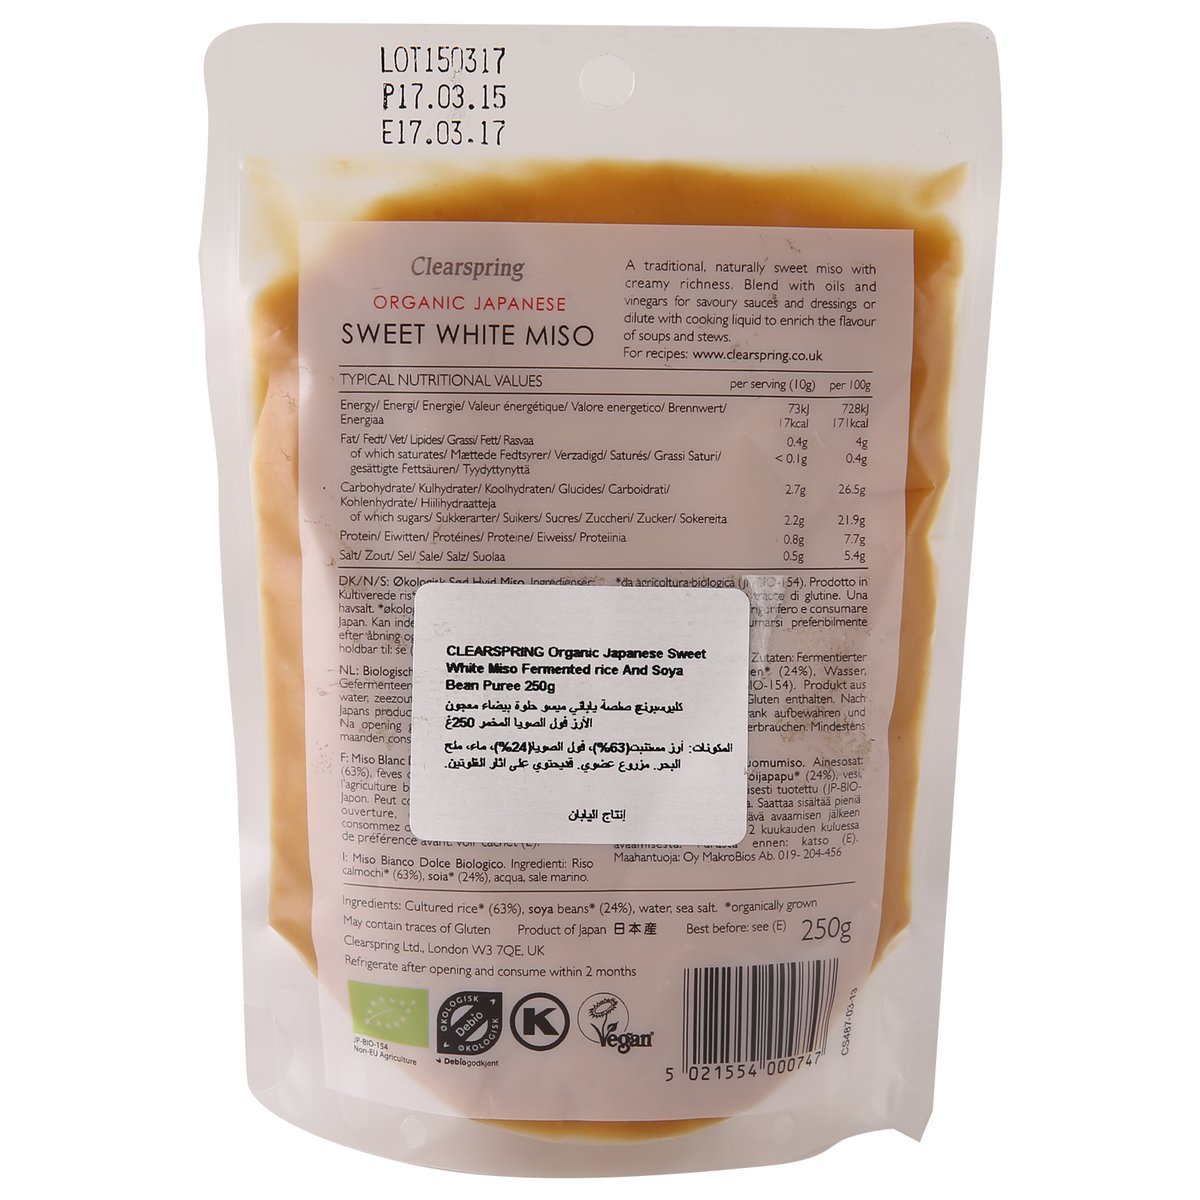 Clearspring Organic Japanese Sweet White Miso Fermented Rice And Soya Bean Puree 250 g